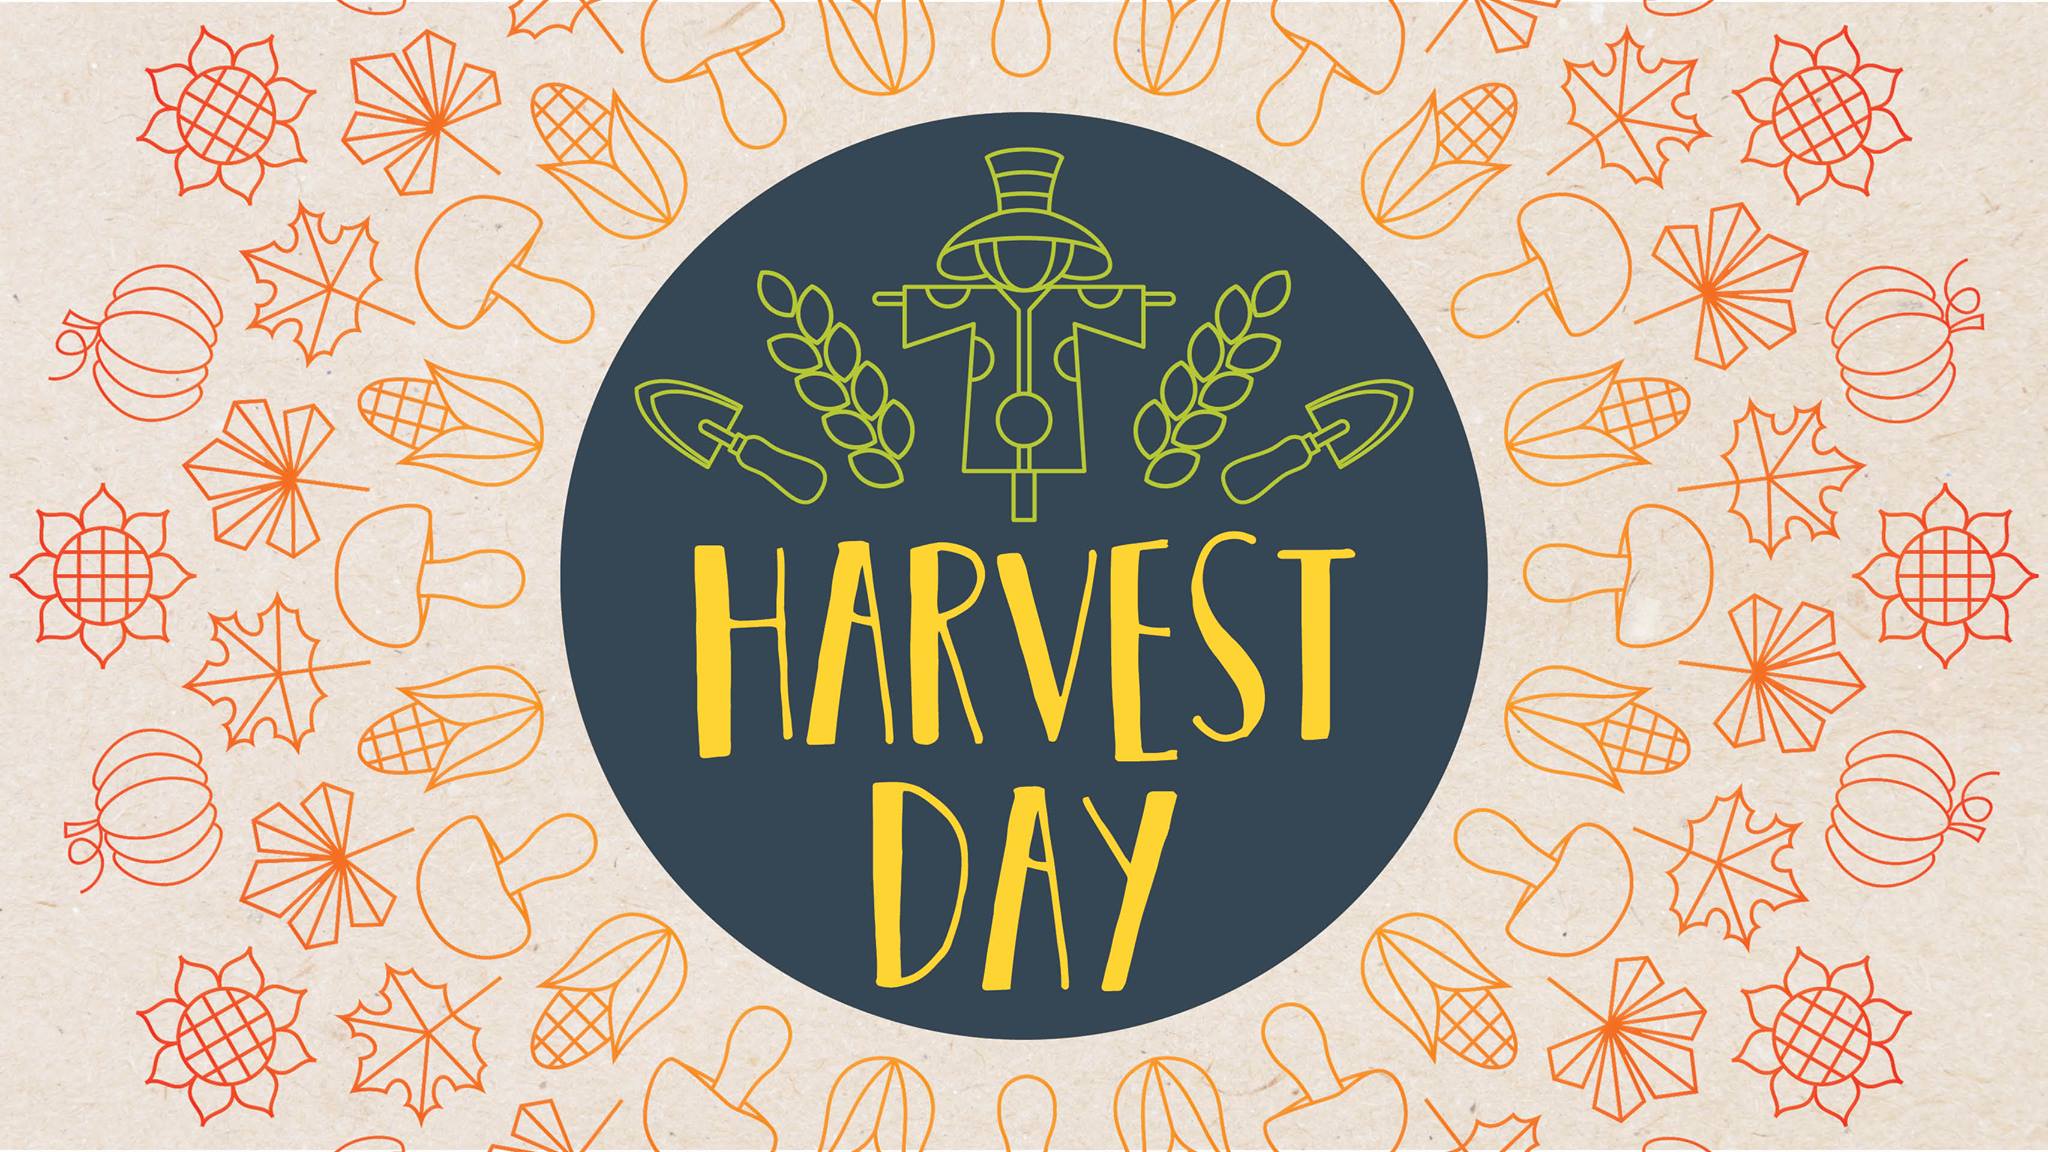 Harvest Day: Saturday, 5 May